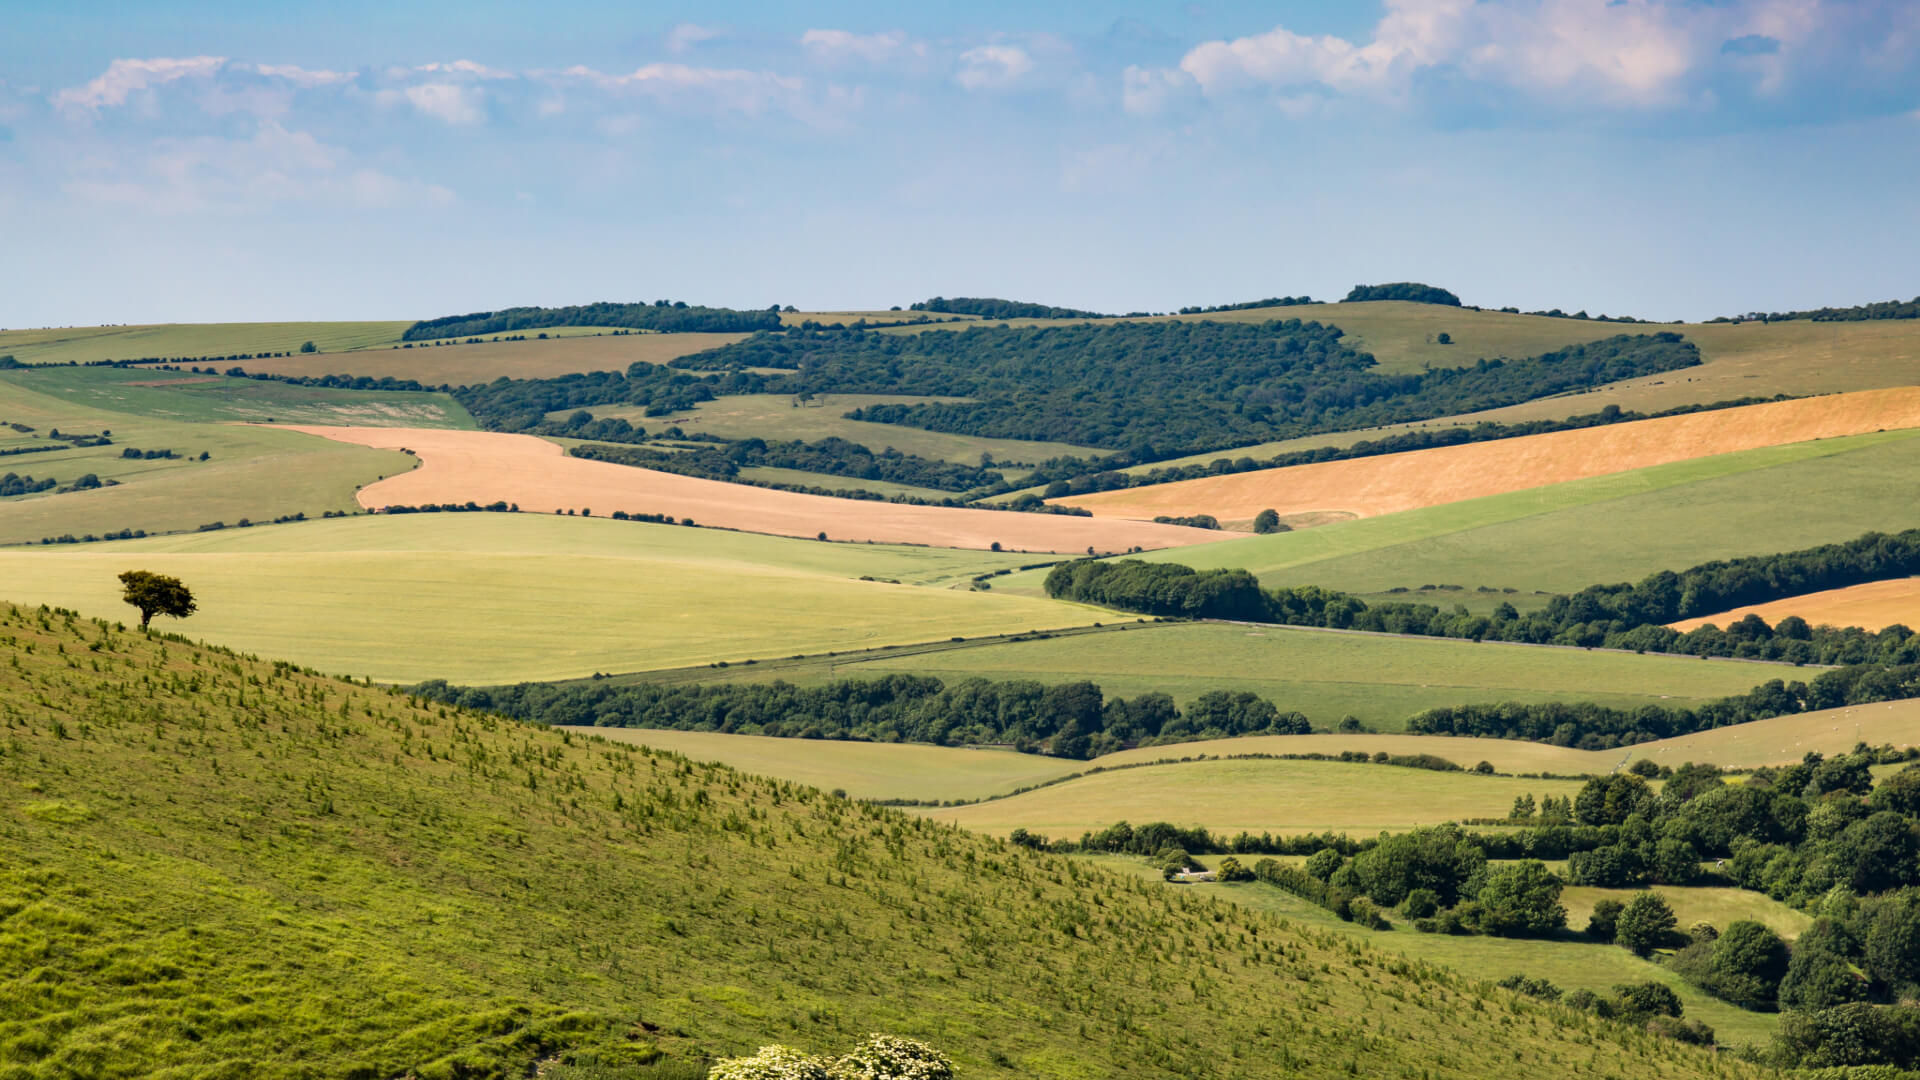 Understanding Tick Hazards in South Downs National Park: New Research Insights